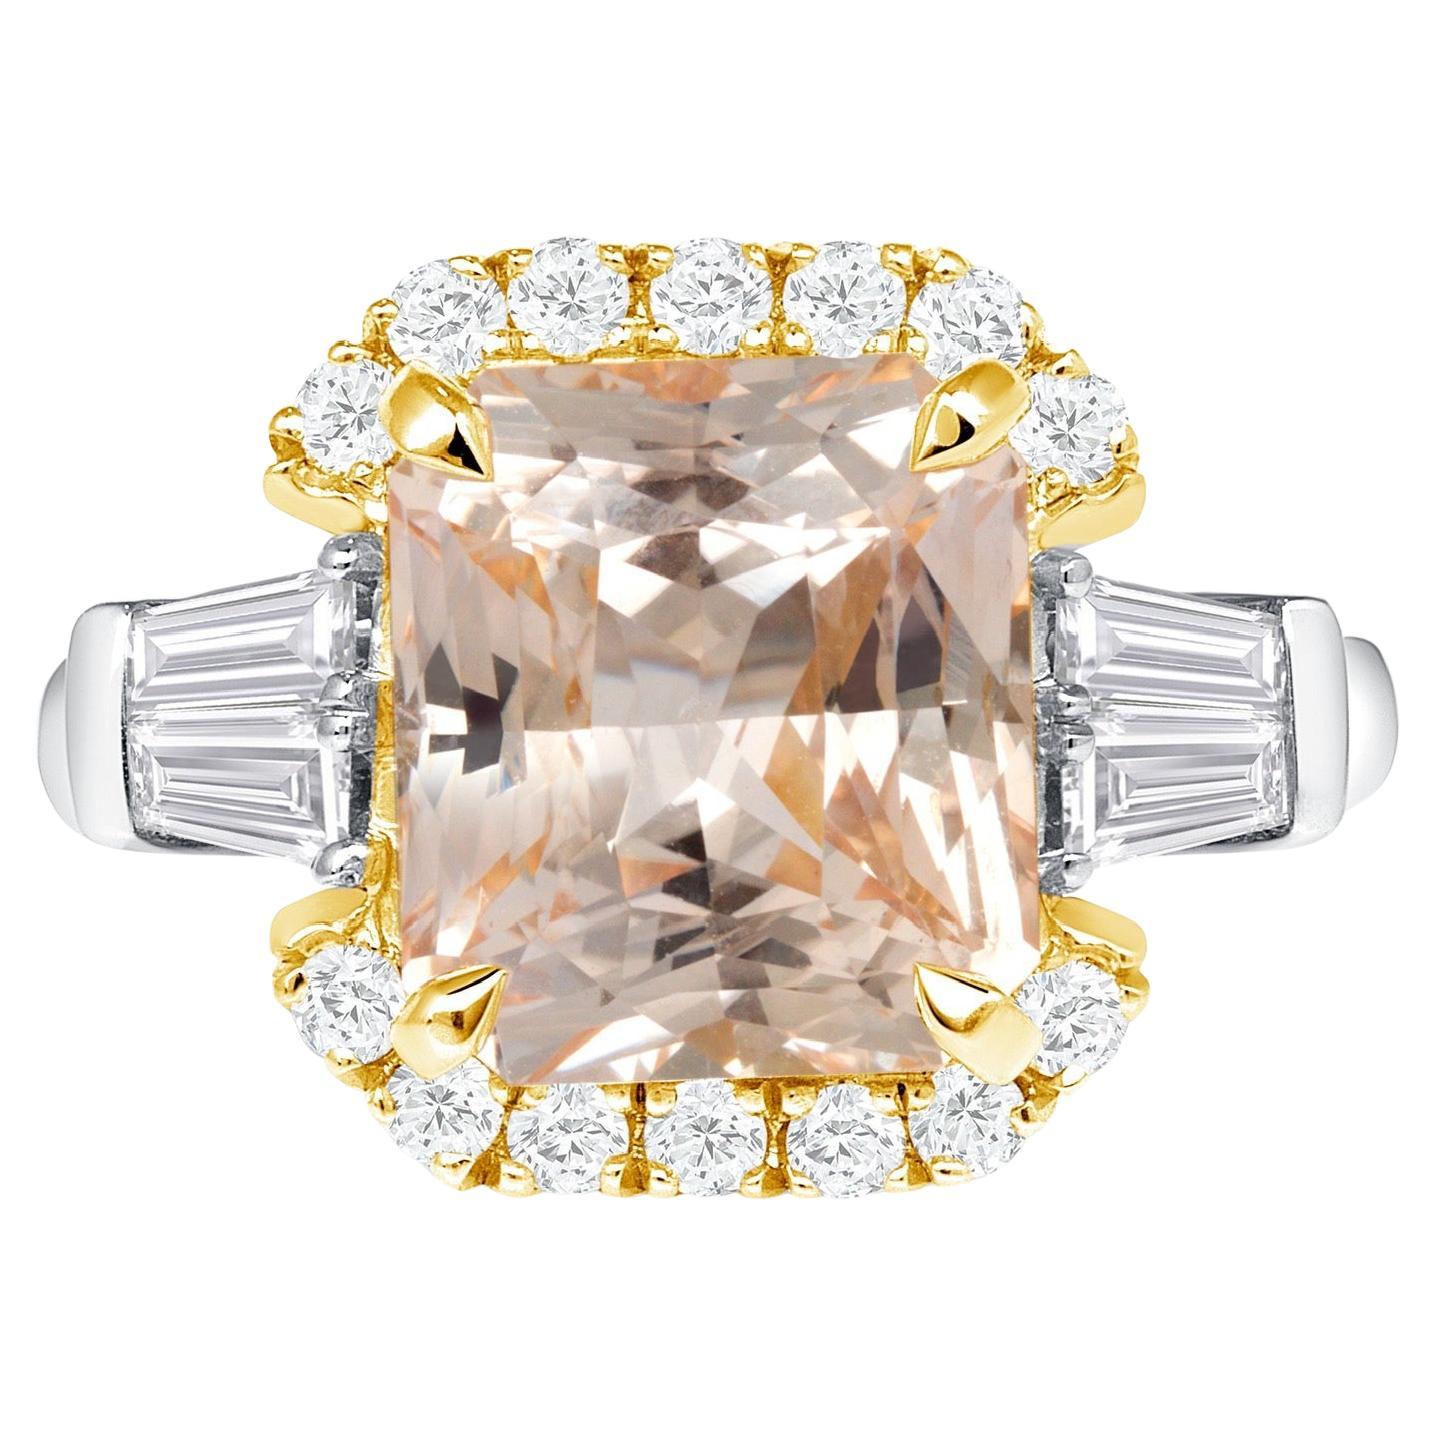 6.02ct, untreated radiant-cut Peach Sapphire ring in platinum.  For Sale